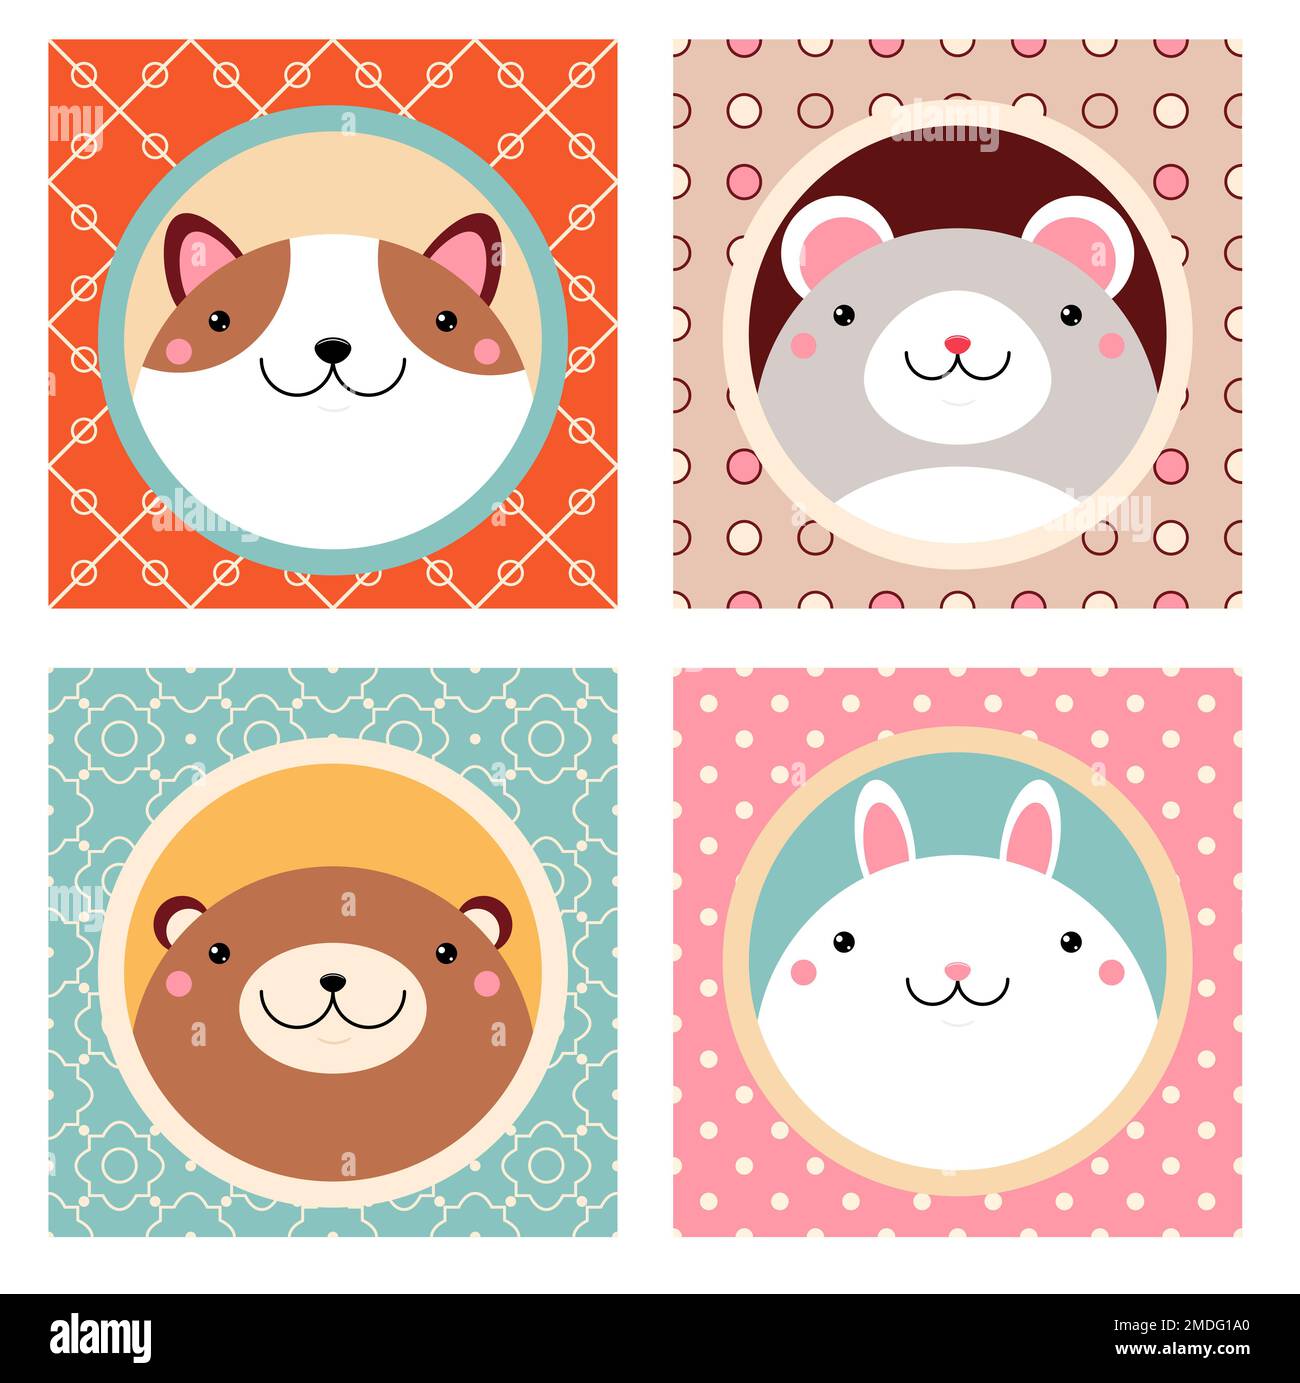 Set of kawaii member icon. Square cards with cute cartoon animals. Baby collection of avatars with bunny, dog, bear, mouse. Vector illustration EPS8 Stock Photo